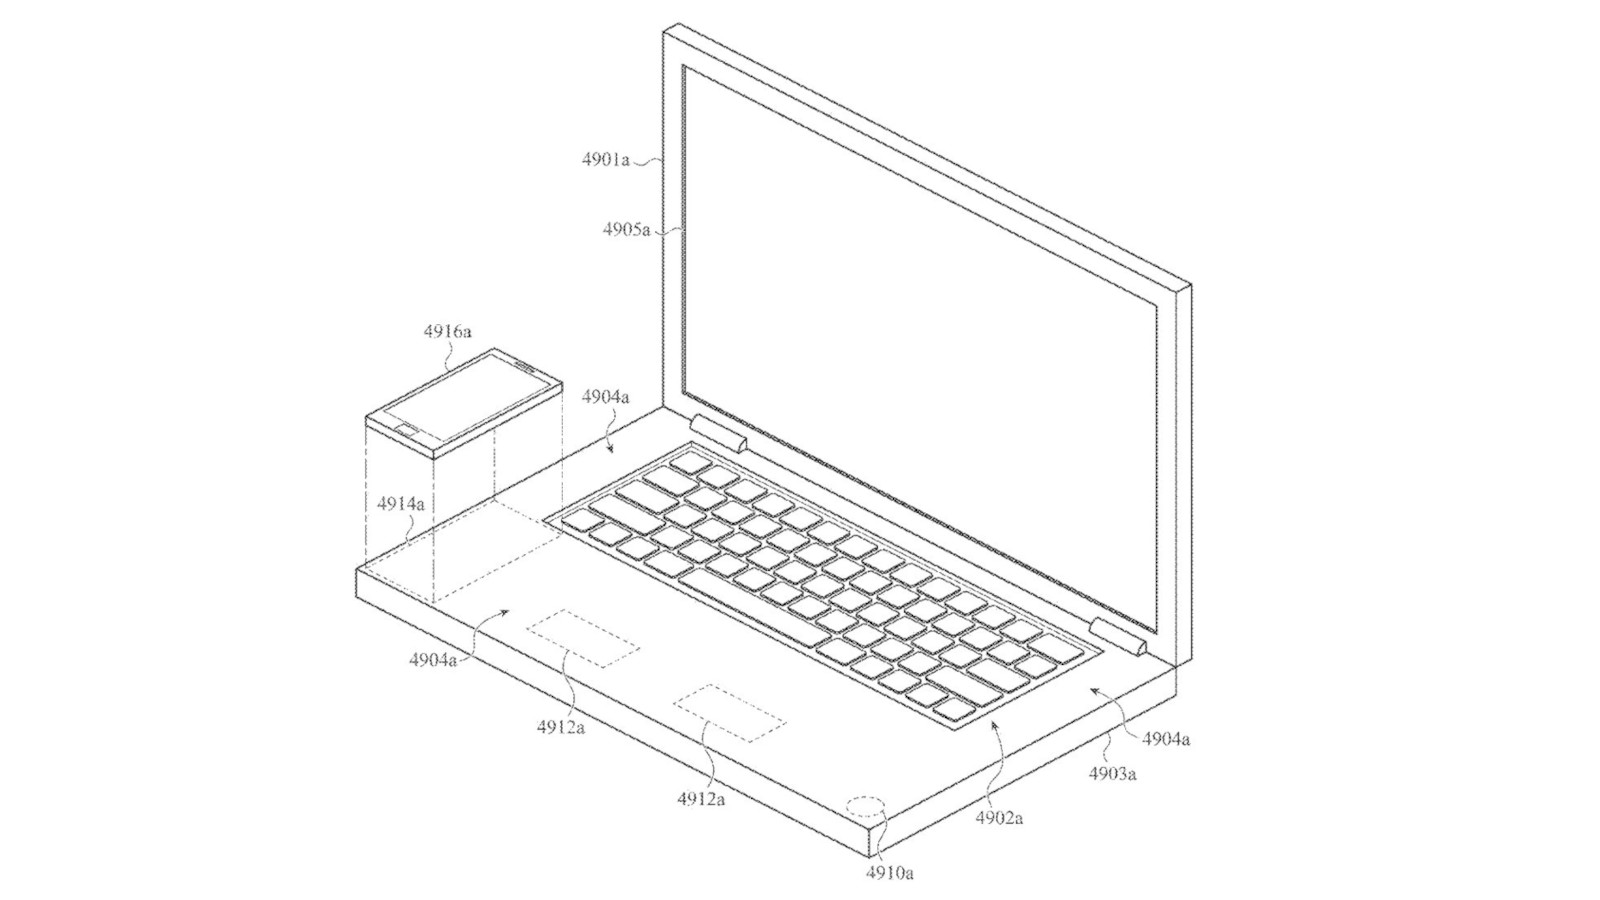 An Apple design patent showing a MacBook pro laptop illustration with a built-in wireless iPhone charger